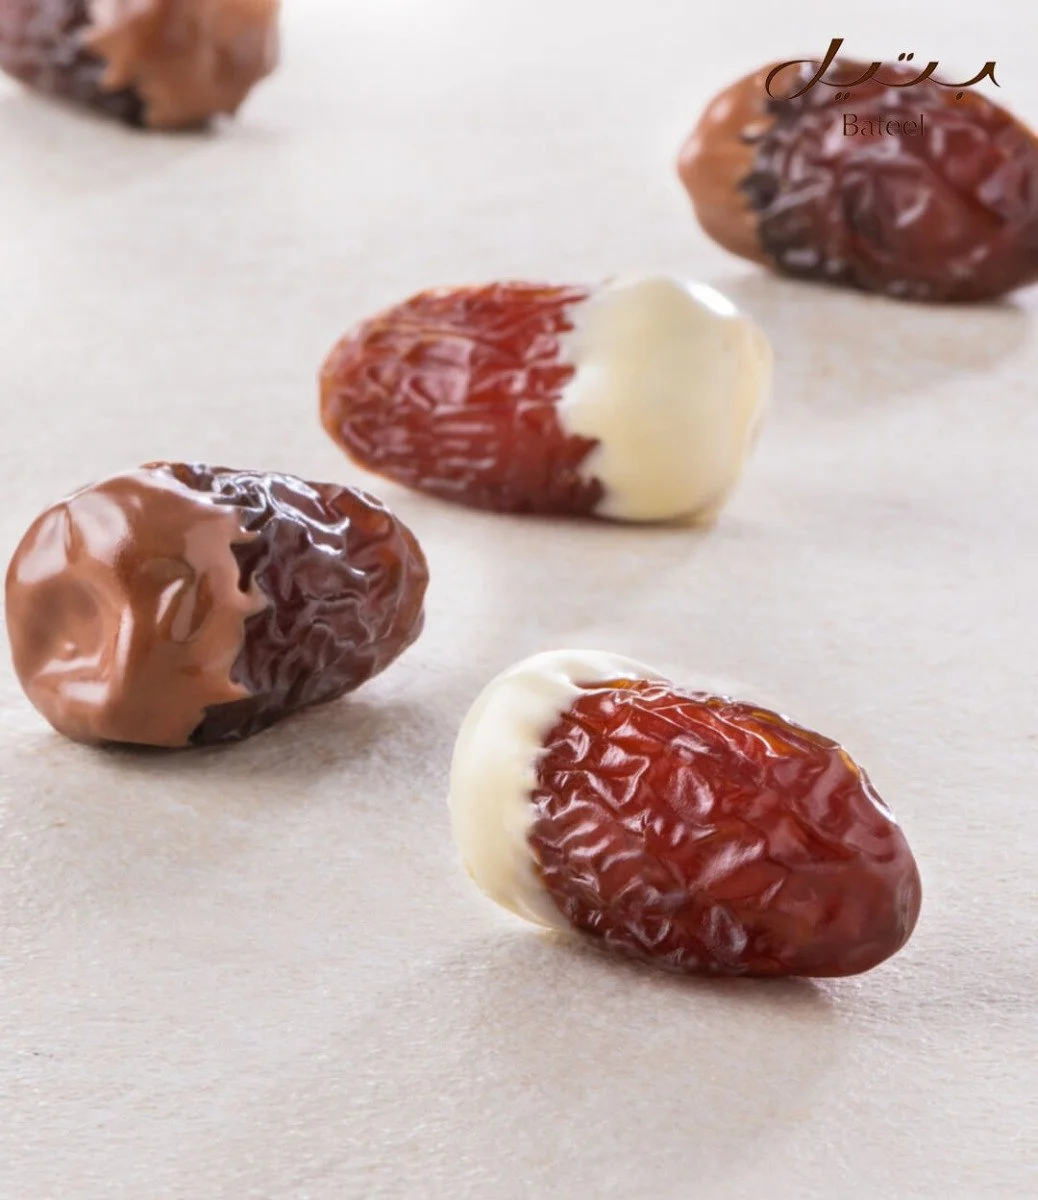 Chocolate Covered Dates by Bateel